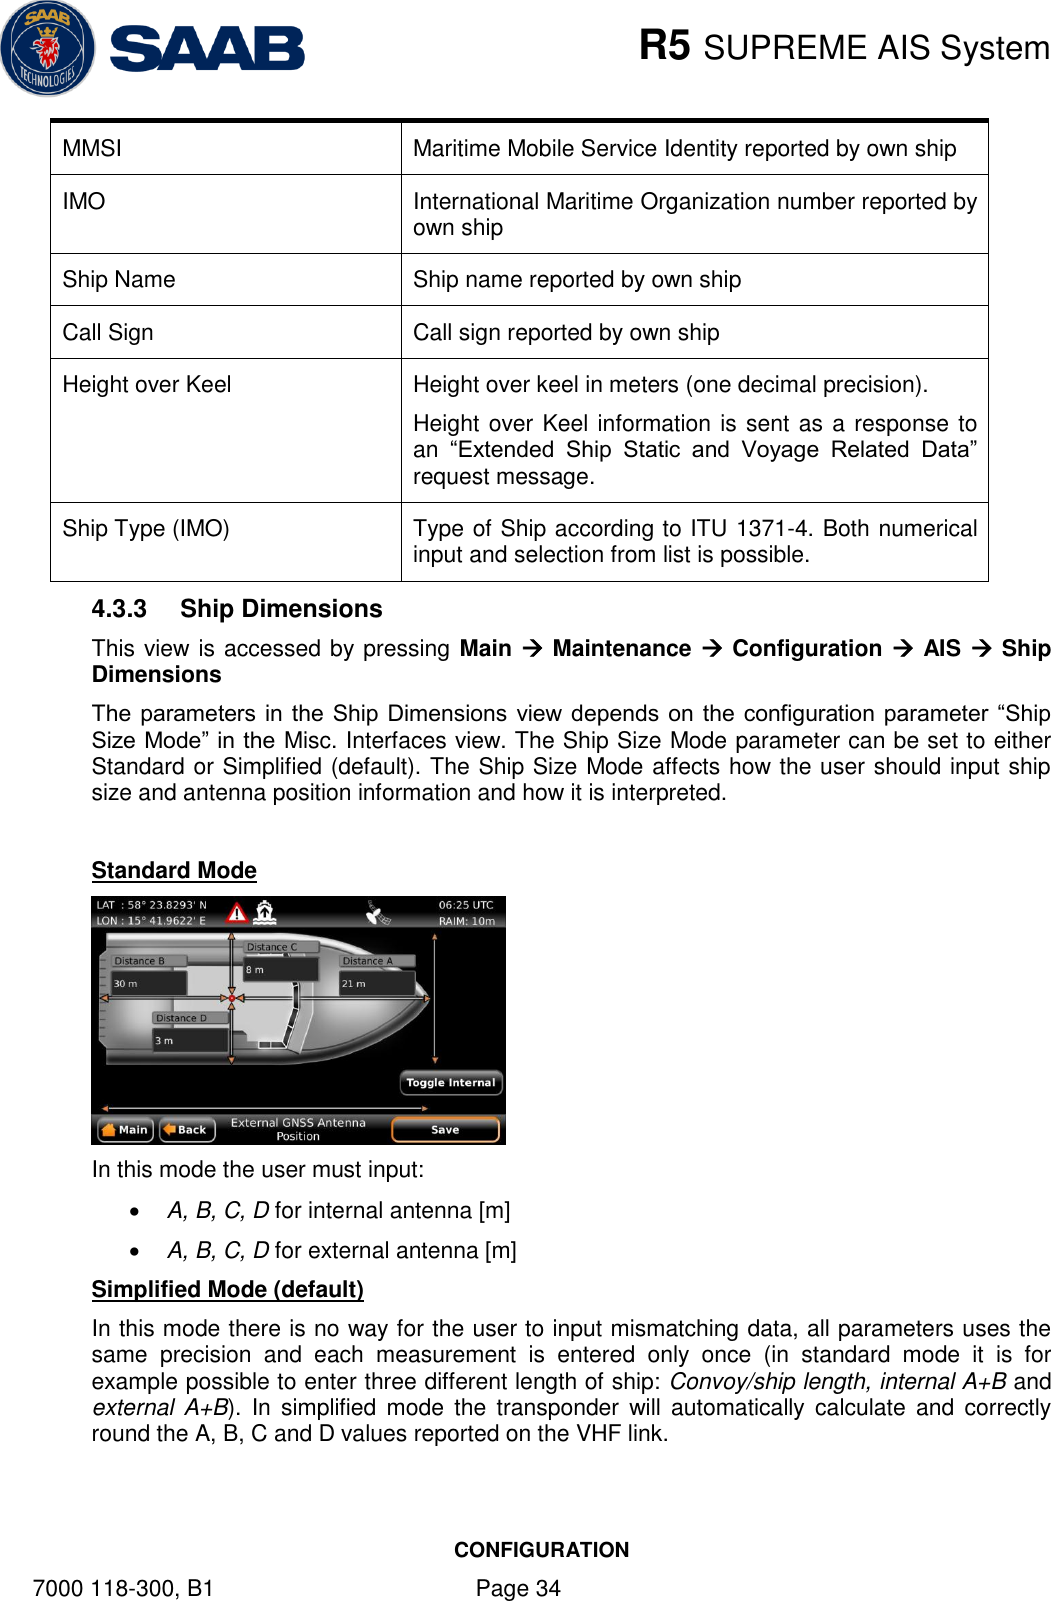    R5 SUPREME AIS System CONFIGURATION 7000 118-300, B1    Page 34 MMSI Maritime Mobile Service Identity reported by own ship IMO International Maritime Organization number reported by own ship Ship Name Ship name reported by own ship Call Sign Call sign reported by own ship Height over Keel Height over keel in meters (one decimal precision). Height over Keel information is sent as a response to an  “Extended  Ship  Static  and  Voyage  Related  Data” request message. Ship Type (IMO) Type of Ship according to ITU 1371-4. Both numerical input and selection from list is possible. 4.3.3  Ship Dimensions This view is accessed by pressing Main  Maintenance  Configuration  AIS  Ship Dimensions The parameters in  the Ship Dimensions view depends on  the configuration parameter “Ship Size Mode” in the Misc. Interfaces view. The Ship Size Mode parameter can be set to either Standard or Simplified (default). The Ship Size Mode affects how the user should input ship size and antenna position information and how it is interpreted.  Standard Mode  In this mode the user must input:  A, B, C, D for internal antenna [m]  A, B, C, D for external antenna [m] Simplified Mode (default) In this mode there is no way for the user to input mismatching data, all parameters uses the same  precision  and  each  measurement  is  entered  only  once  (in  standard  mode  it  is  for example possible to enter three different length of ship: Convoy/ship length, internal A+B and external  A+B). In  simplified mode  the  transponder  will  automatically calculate  and  correctly round the A, B, C and D values reported on the VHF link. 